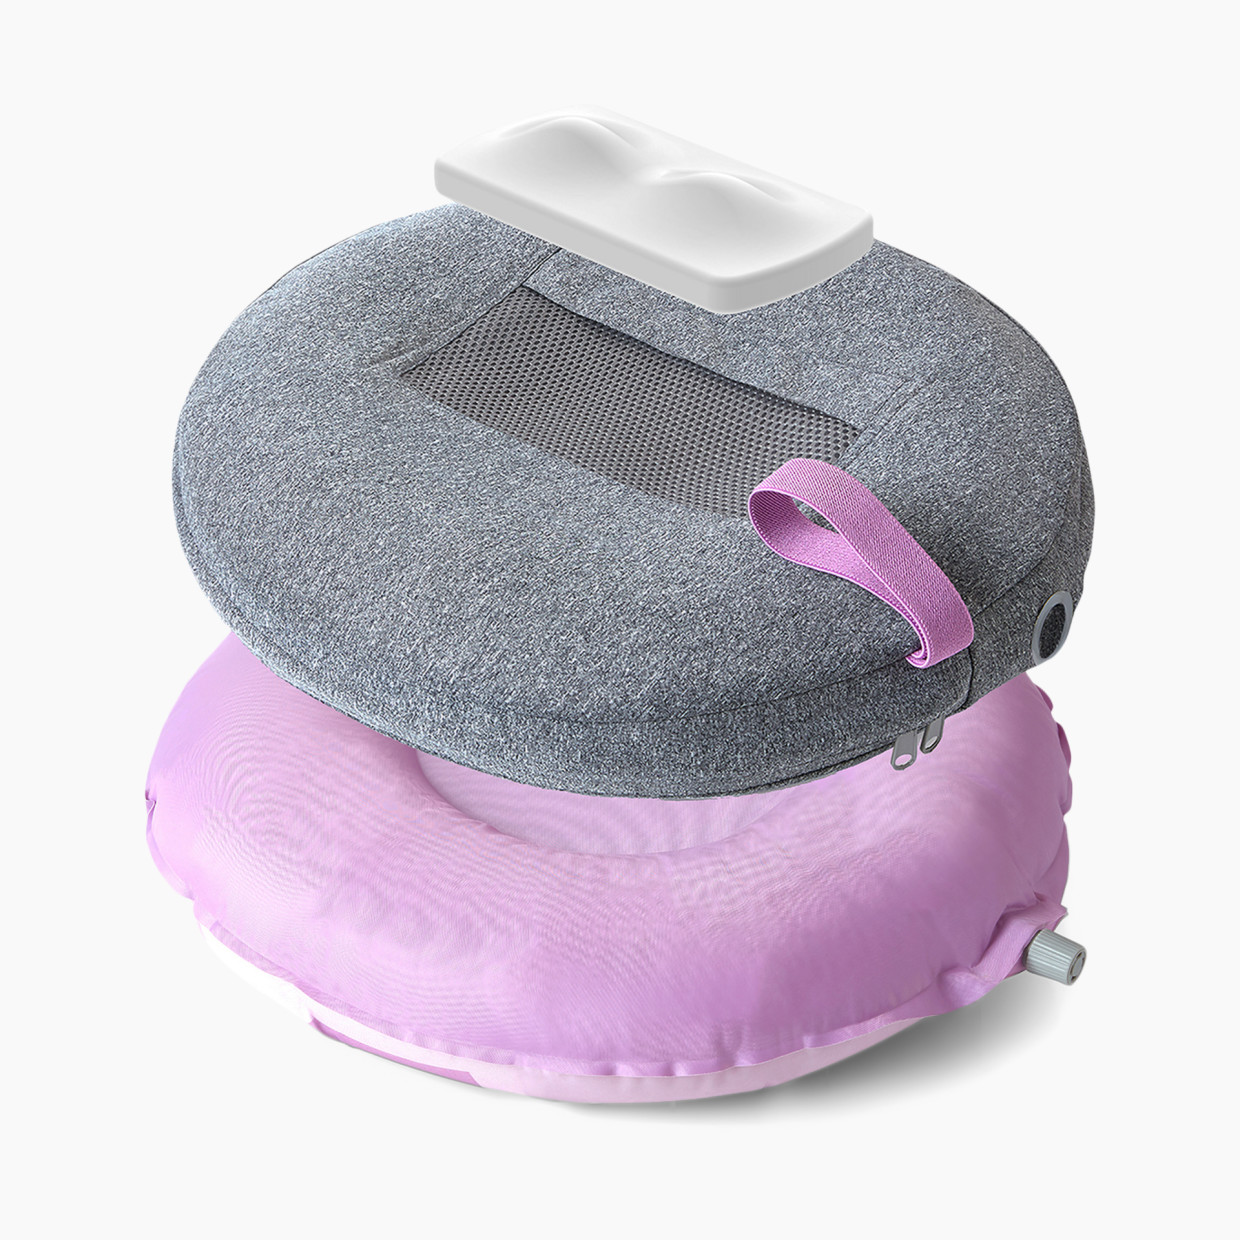 Portable Perineal Cooling Comfort Cushion for Hemorrhoids – Frida